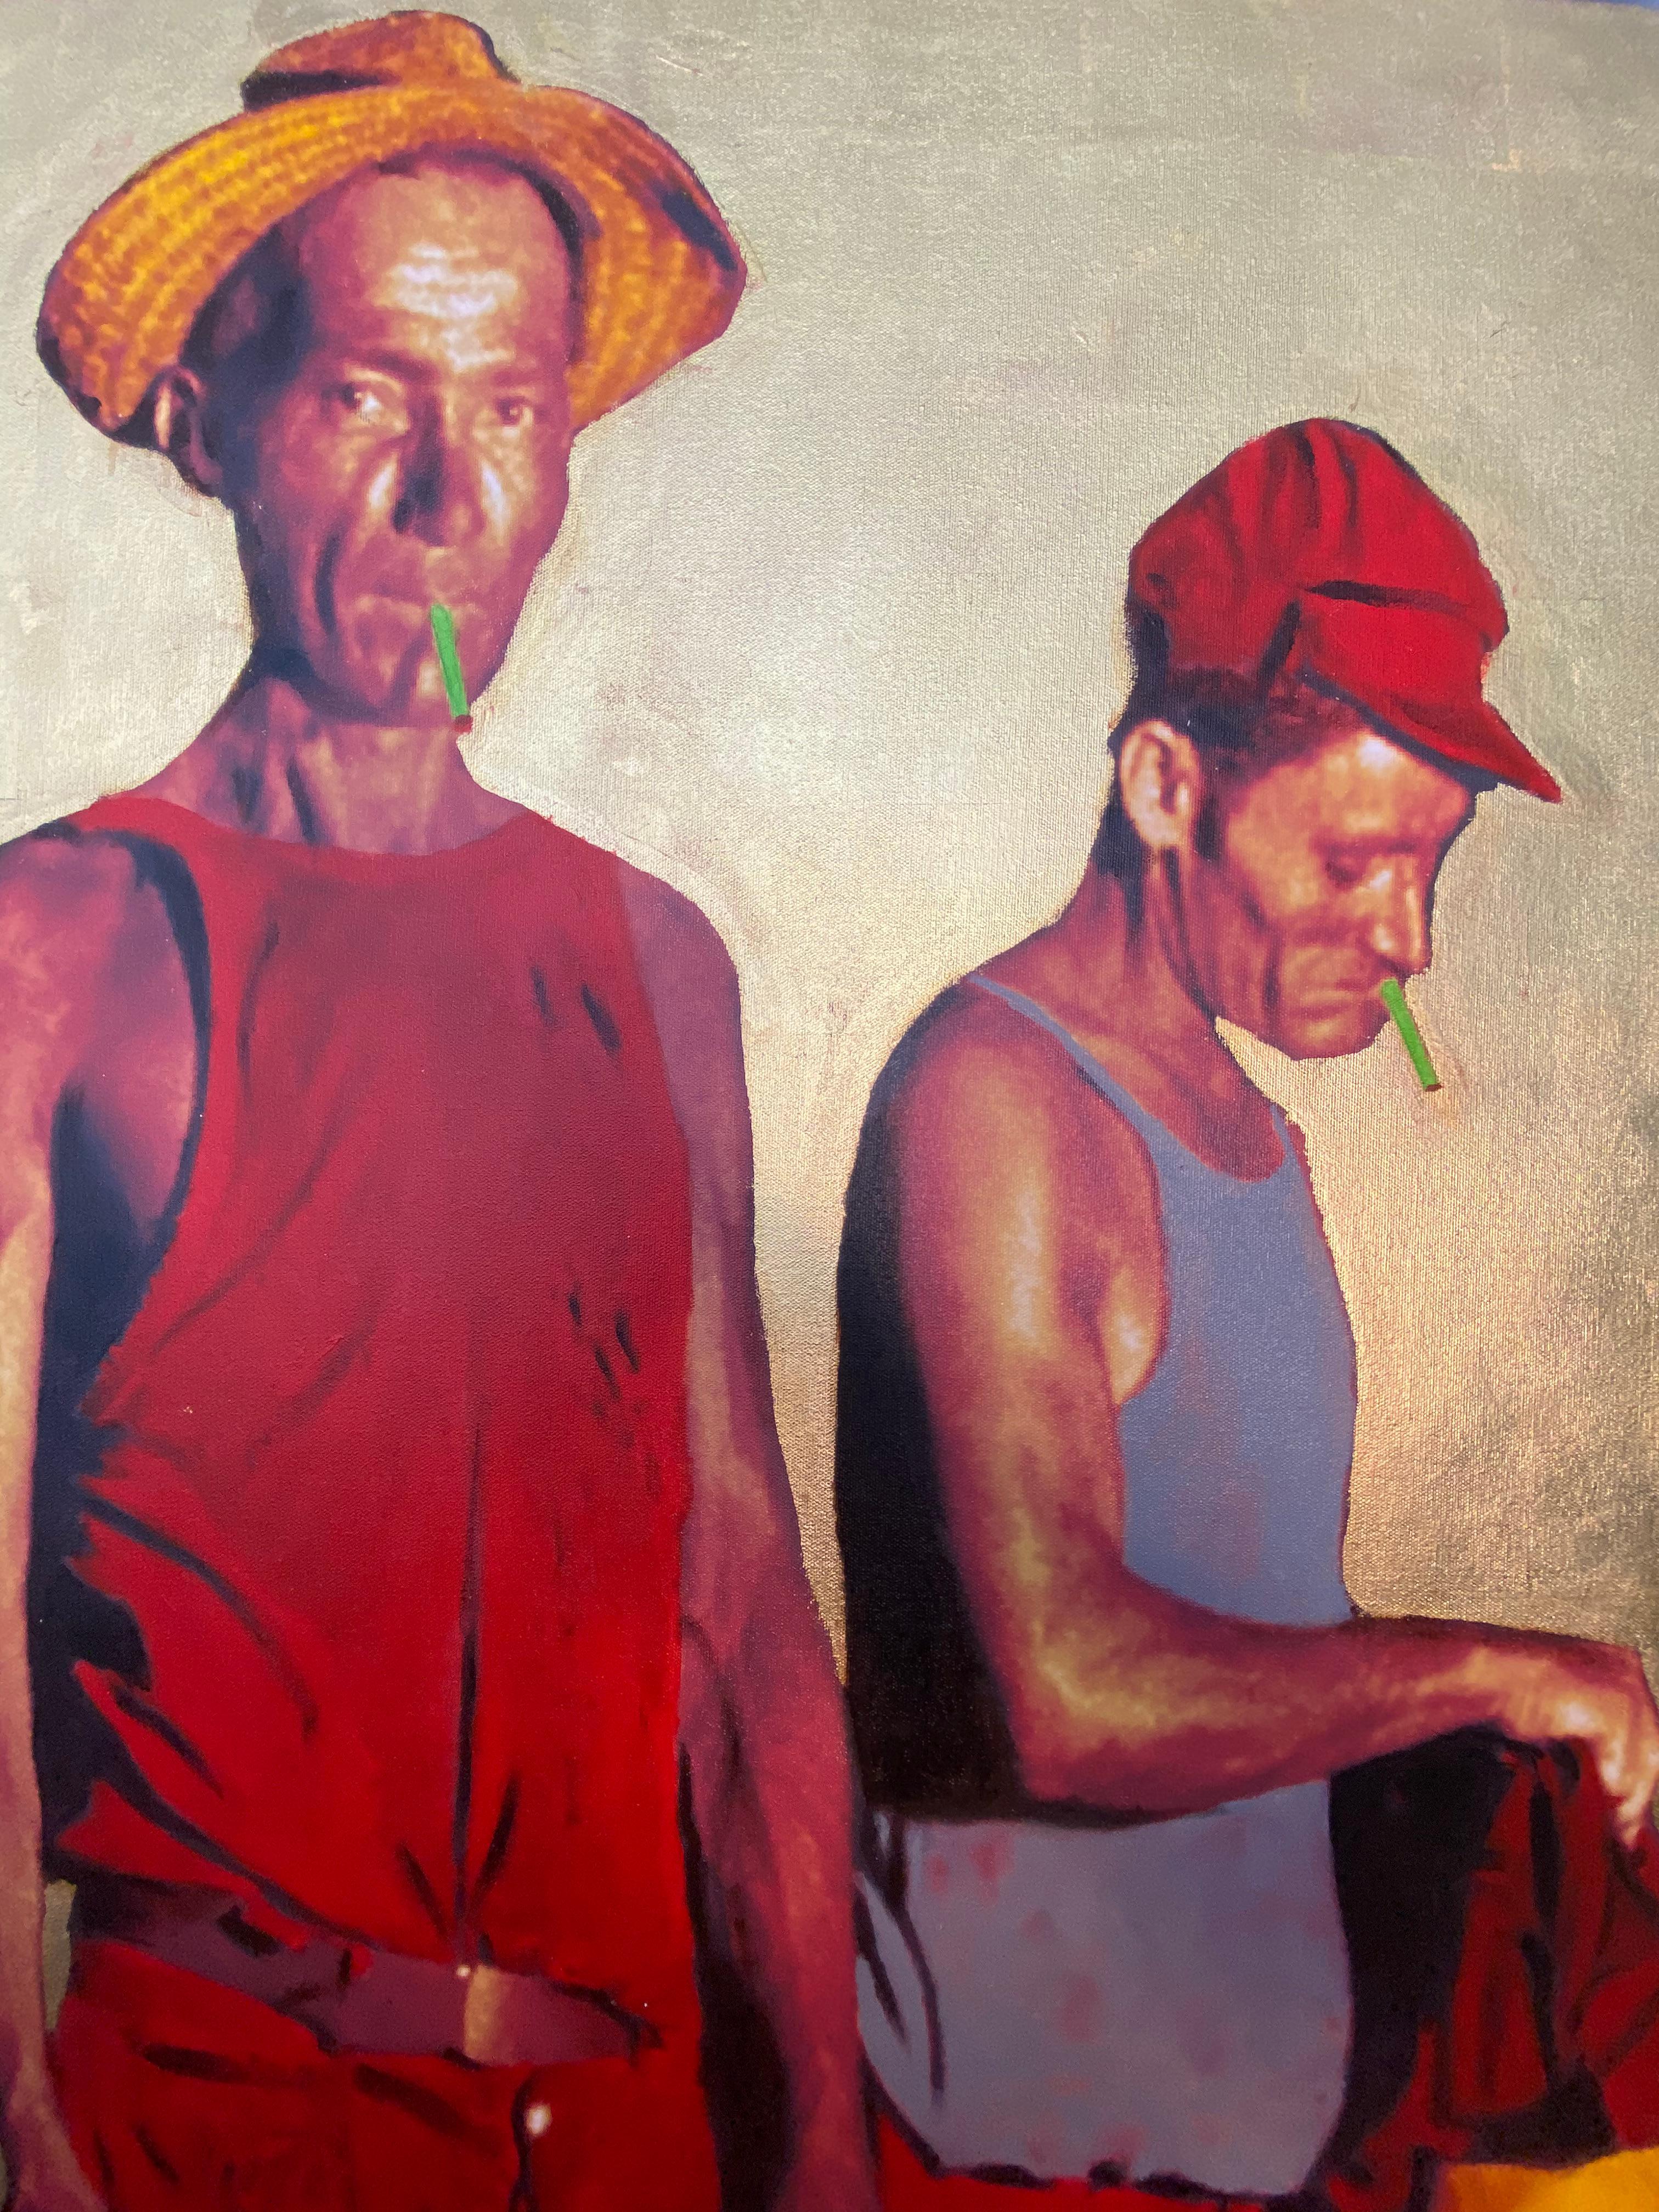 
In this new series Mercado utilizes canvas in big format as a medium to intervene Jack Delano's photographs of Puerto Rican agriculture workers he documented for the FSA in the 1940's. Originally, Mercado intervened Delano's photographs in a